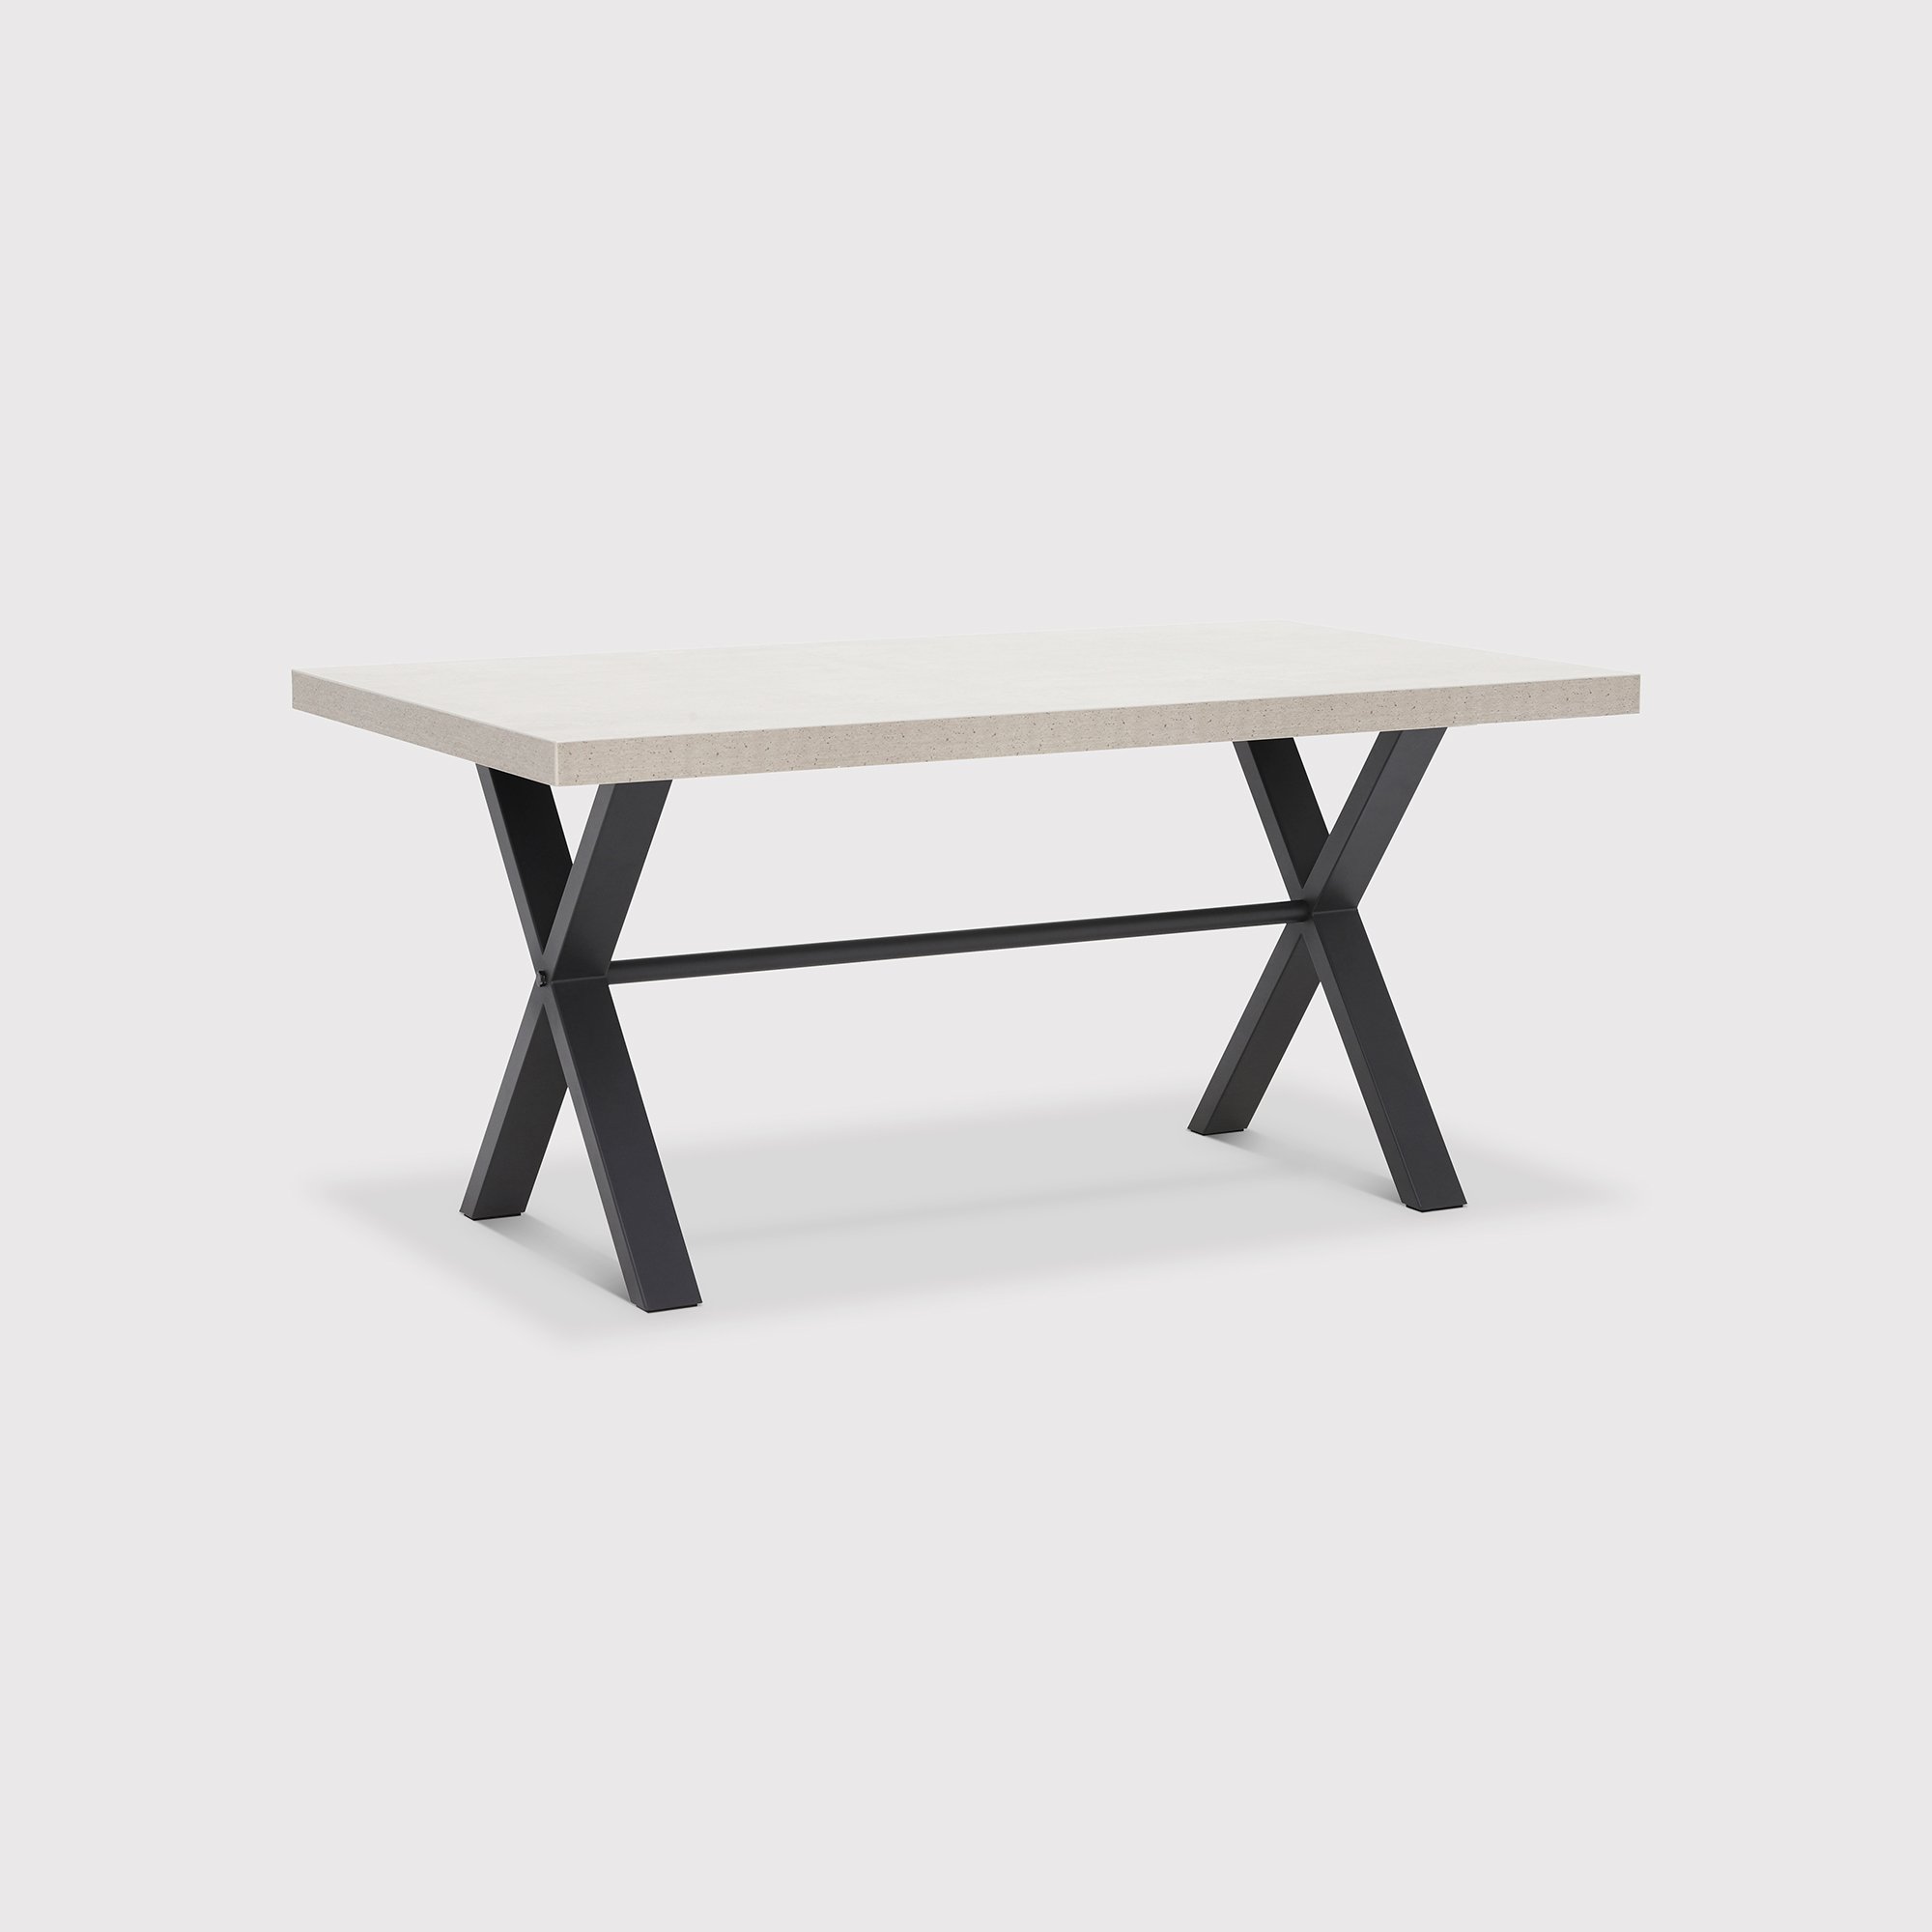 Kalmer Fixed Industrial Dining Table 160cm, Grey | Barker & Stonehouse